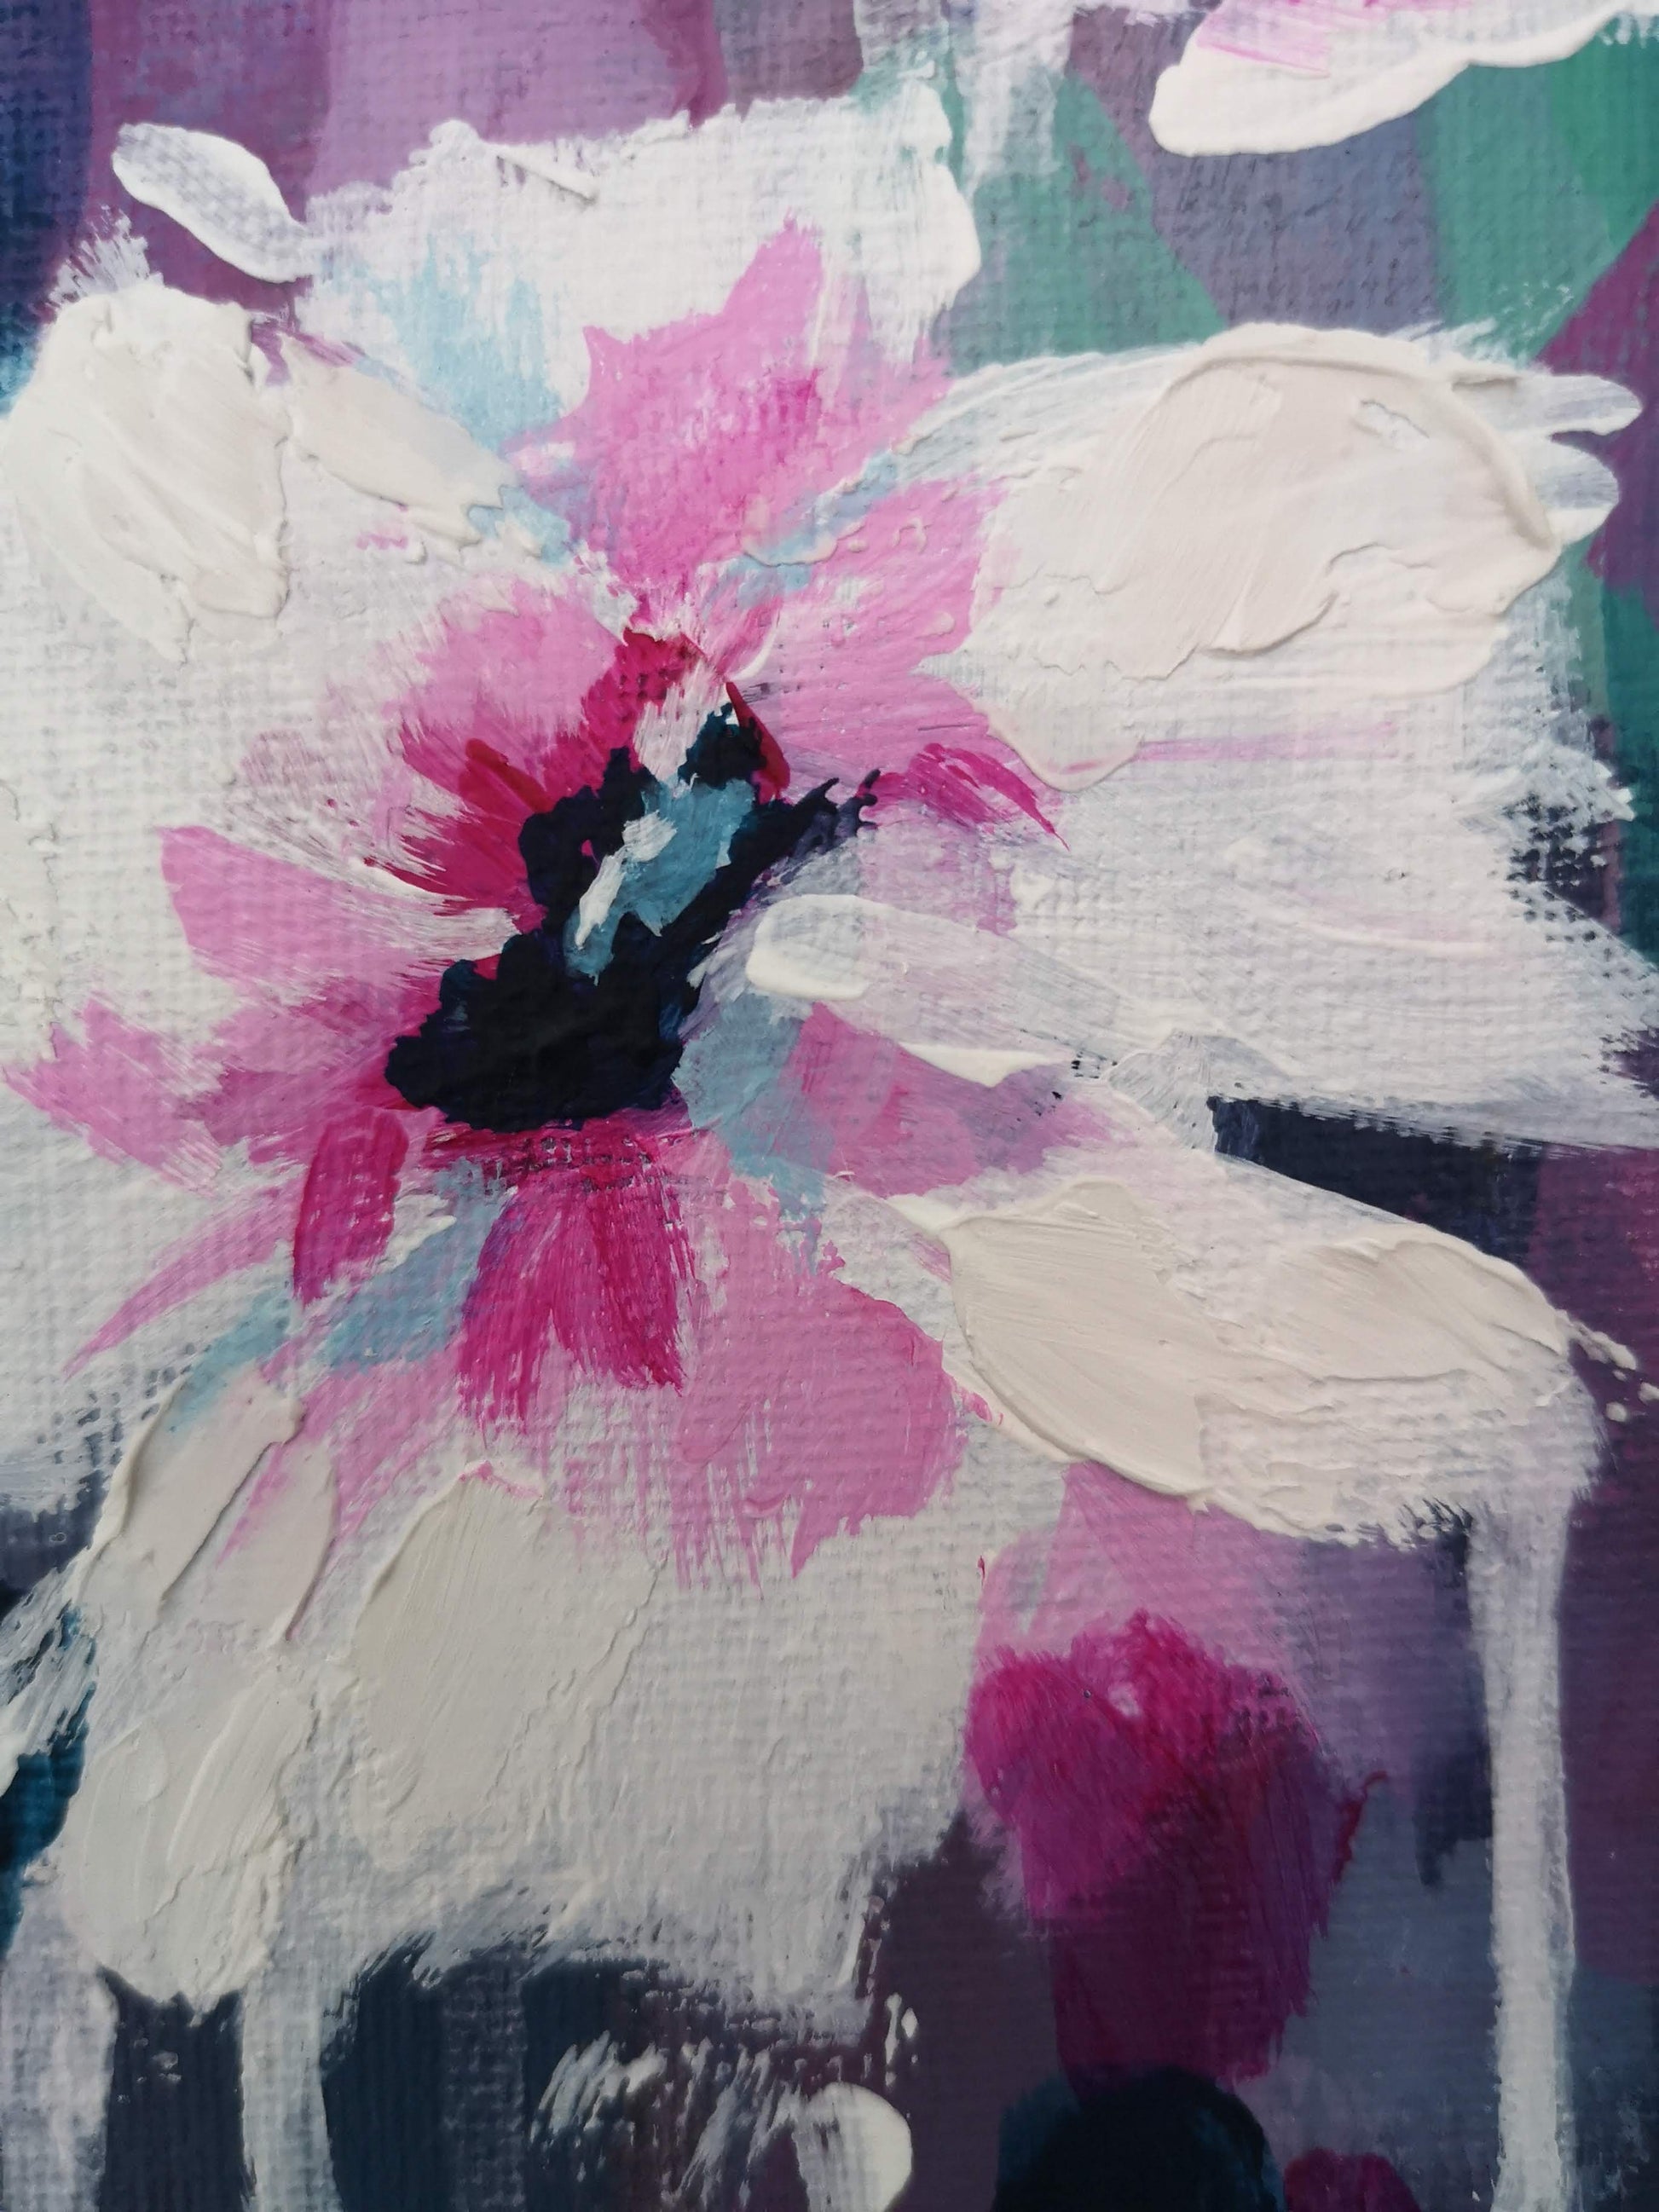 Details of abstract flower painting with white and pink